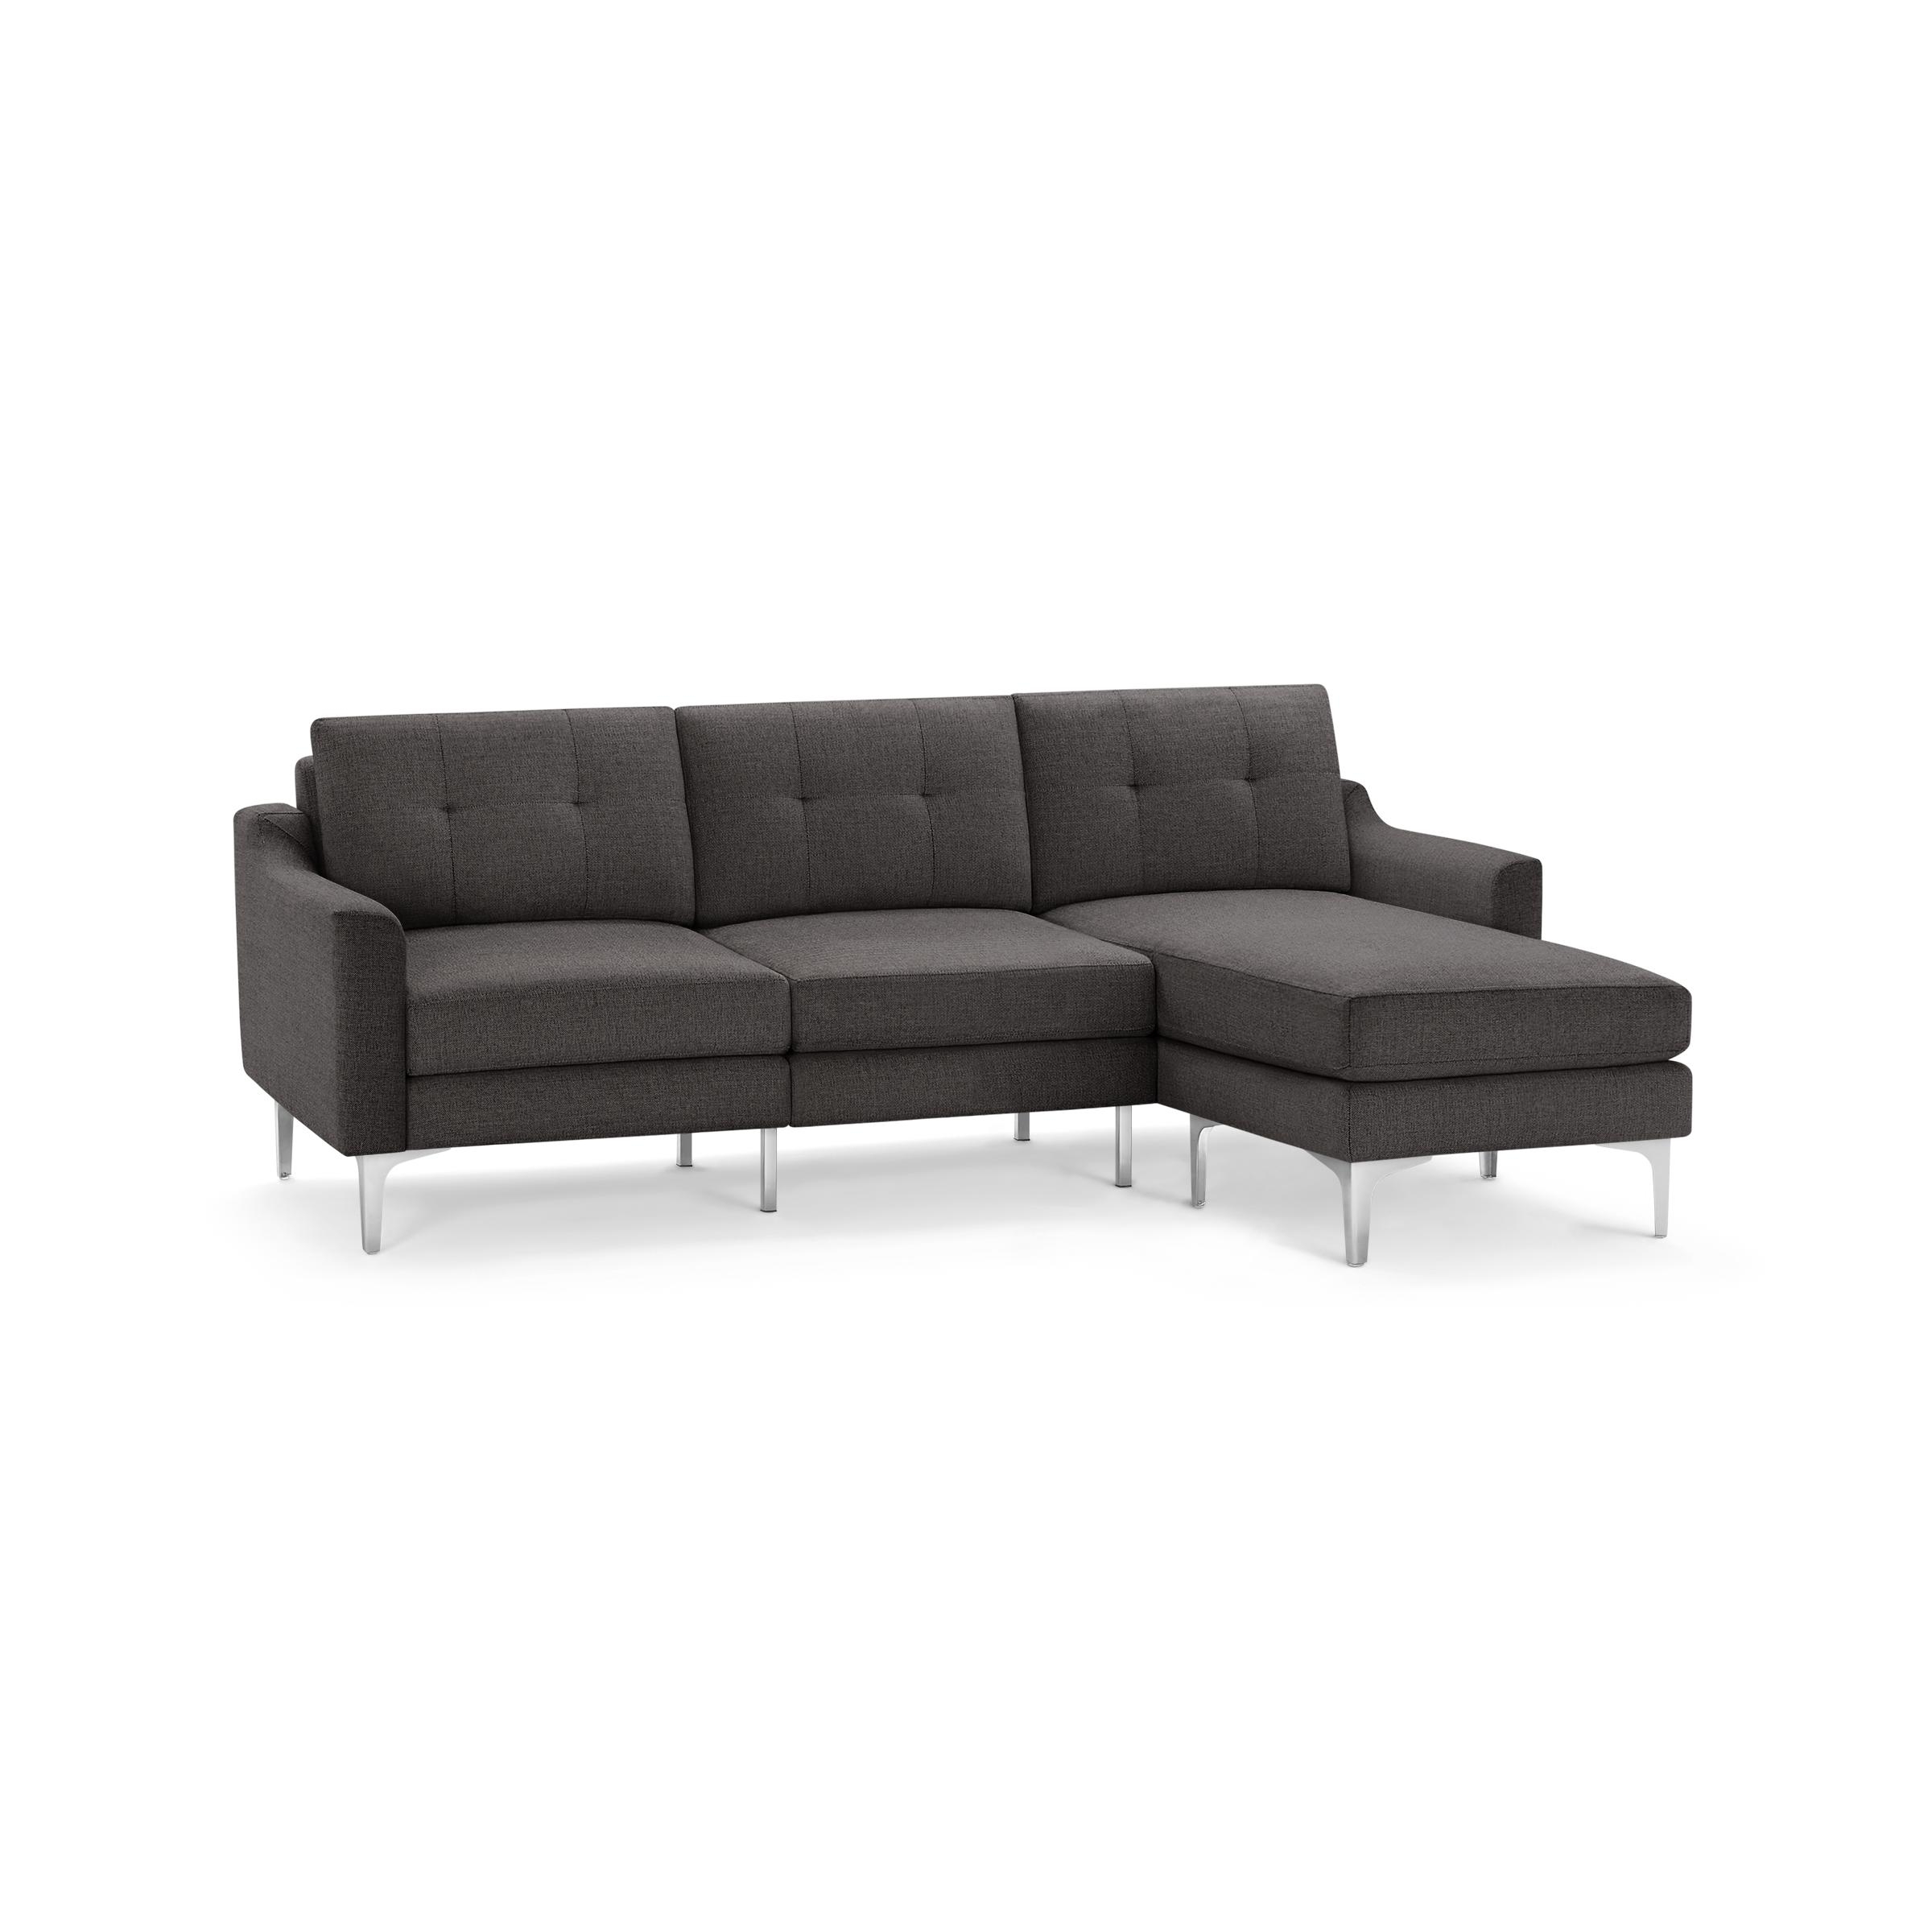 The Slope Nomad Sectional Sofa in Charcoal - Image 1